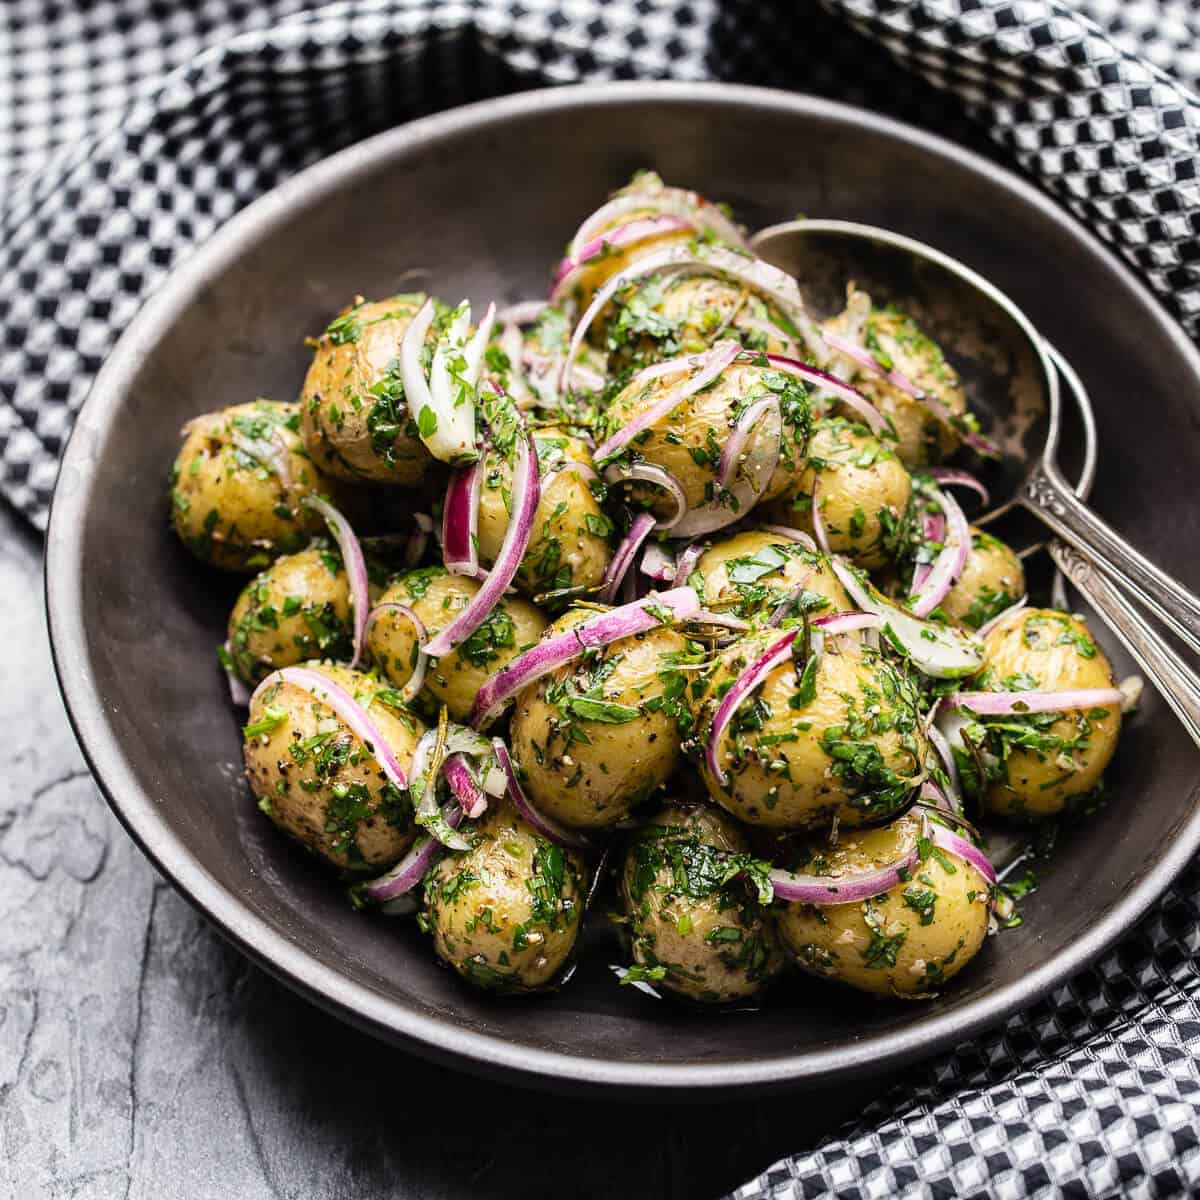 warm potato salad with red onion and parsley in a black bowl with black and white checkered napkin